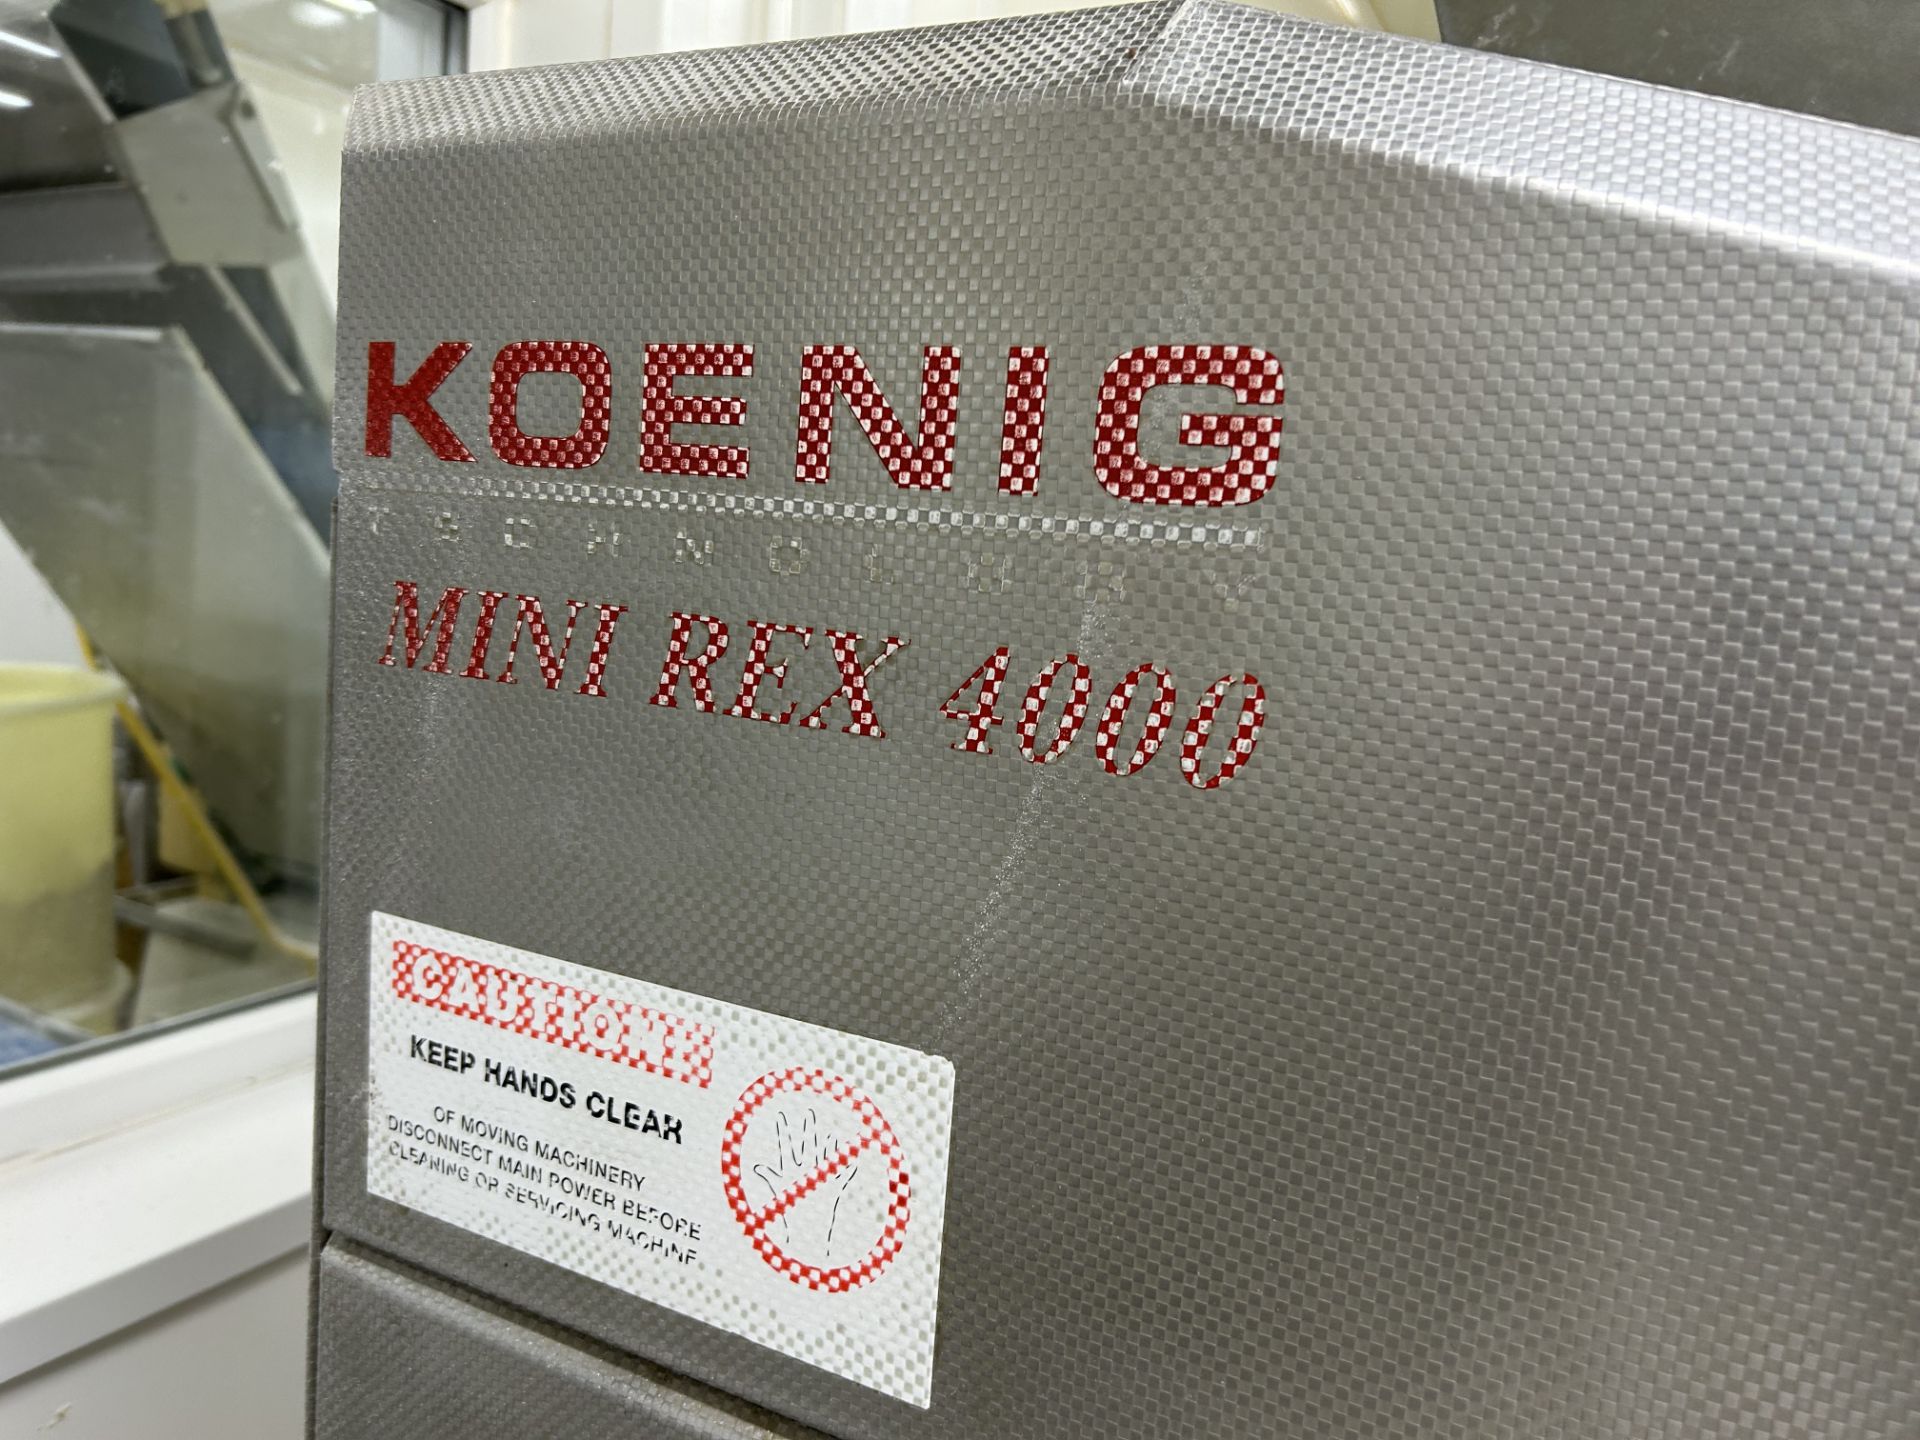 Koenig Mini Rex 2 Pocket Roll Plant | YOM: 2003 | LOCATED IN WHITEFIELD - Image 4 of 8